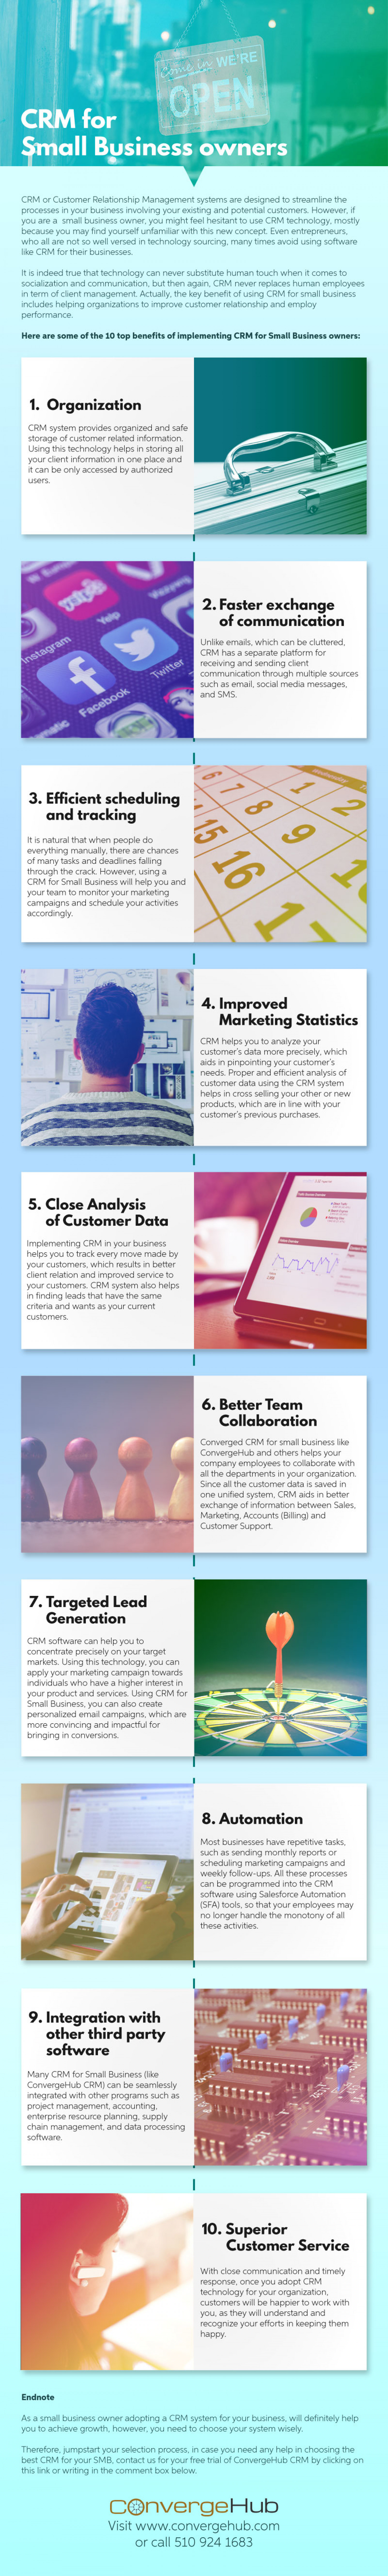 CRM For Small Business Owners Infographic